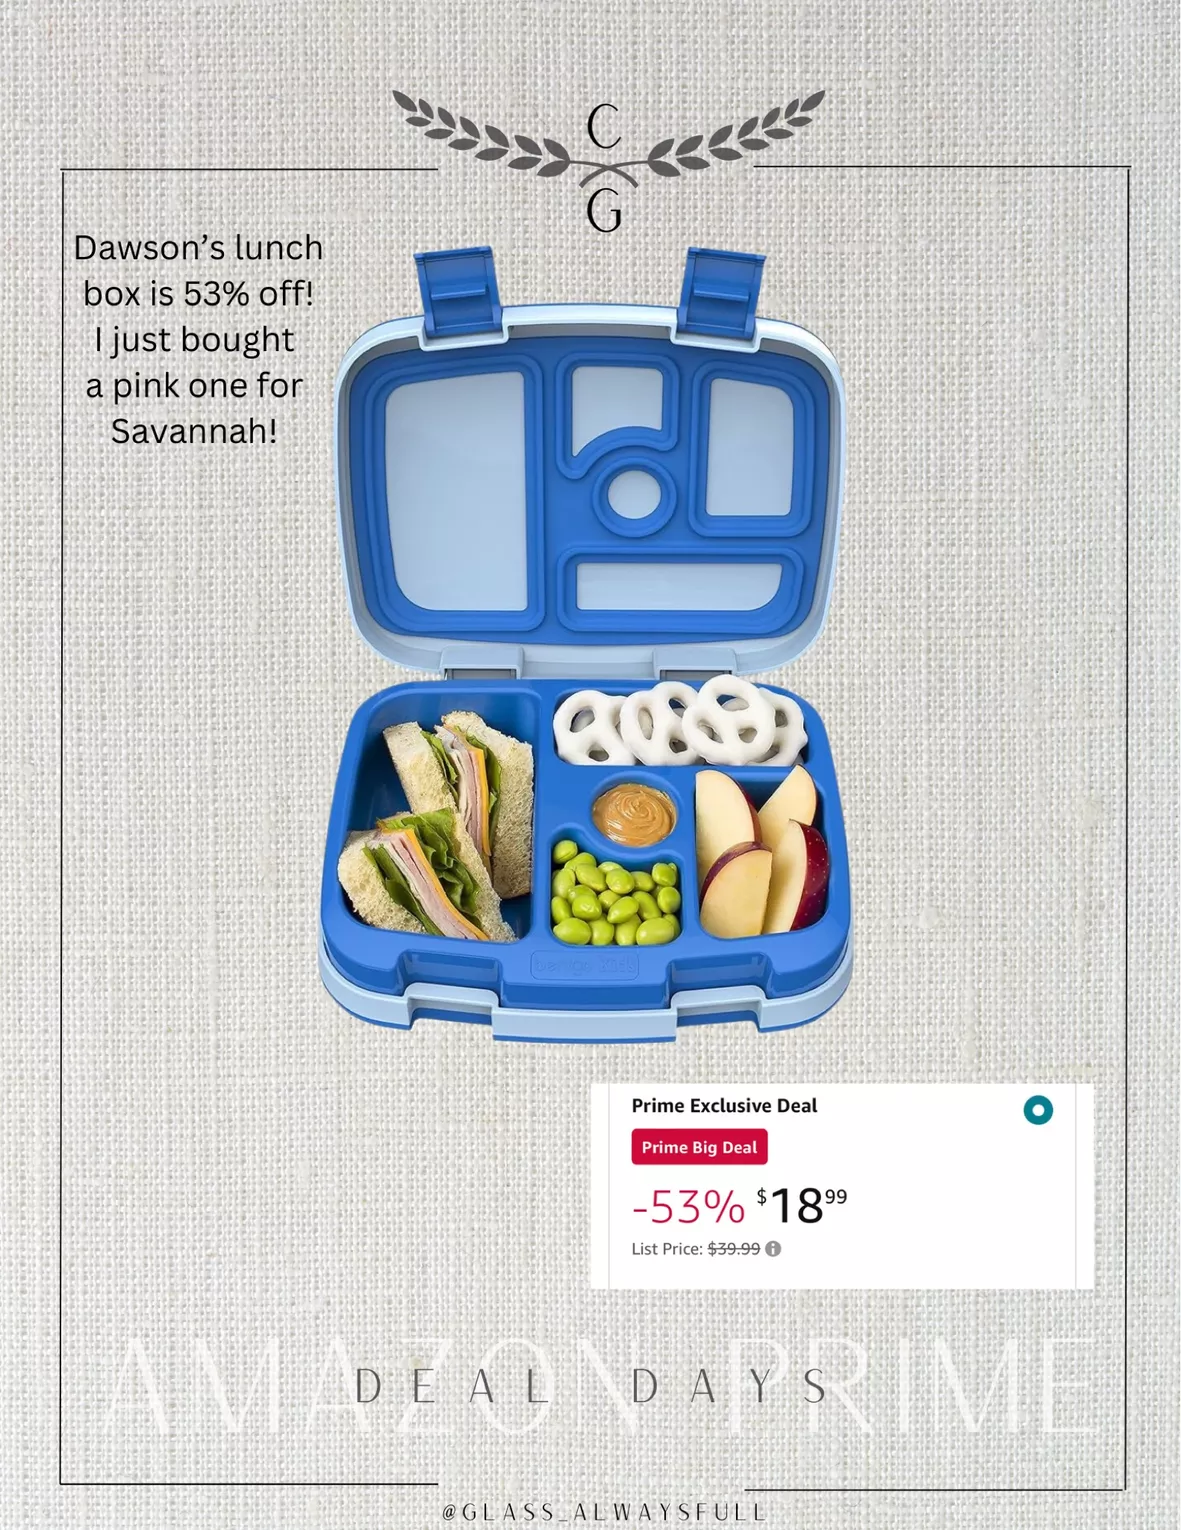 Is Having a One-Day Sale on Bentgo Lunch Boxes